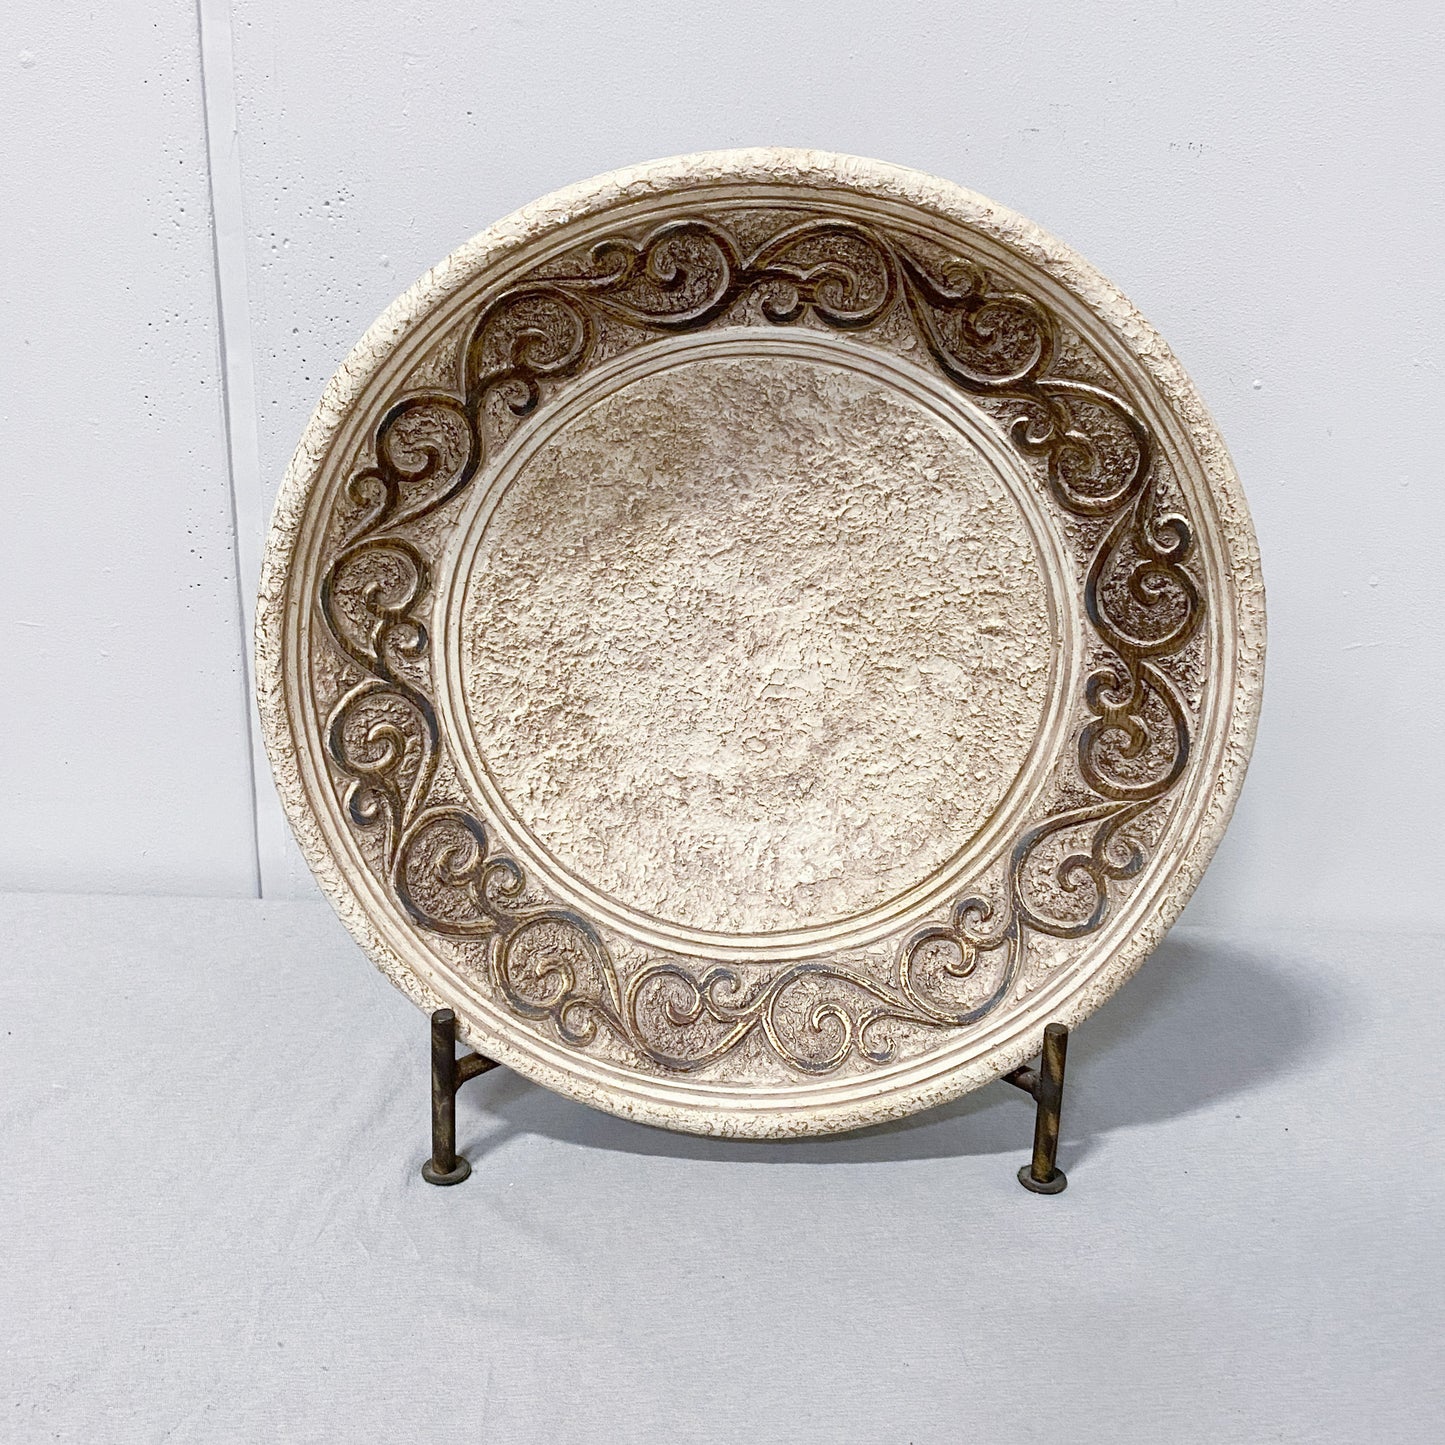 Decorative Cream Bowl with Gold Accents with Stand